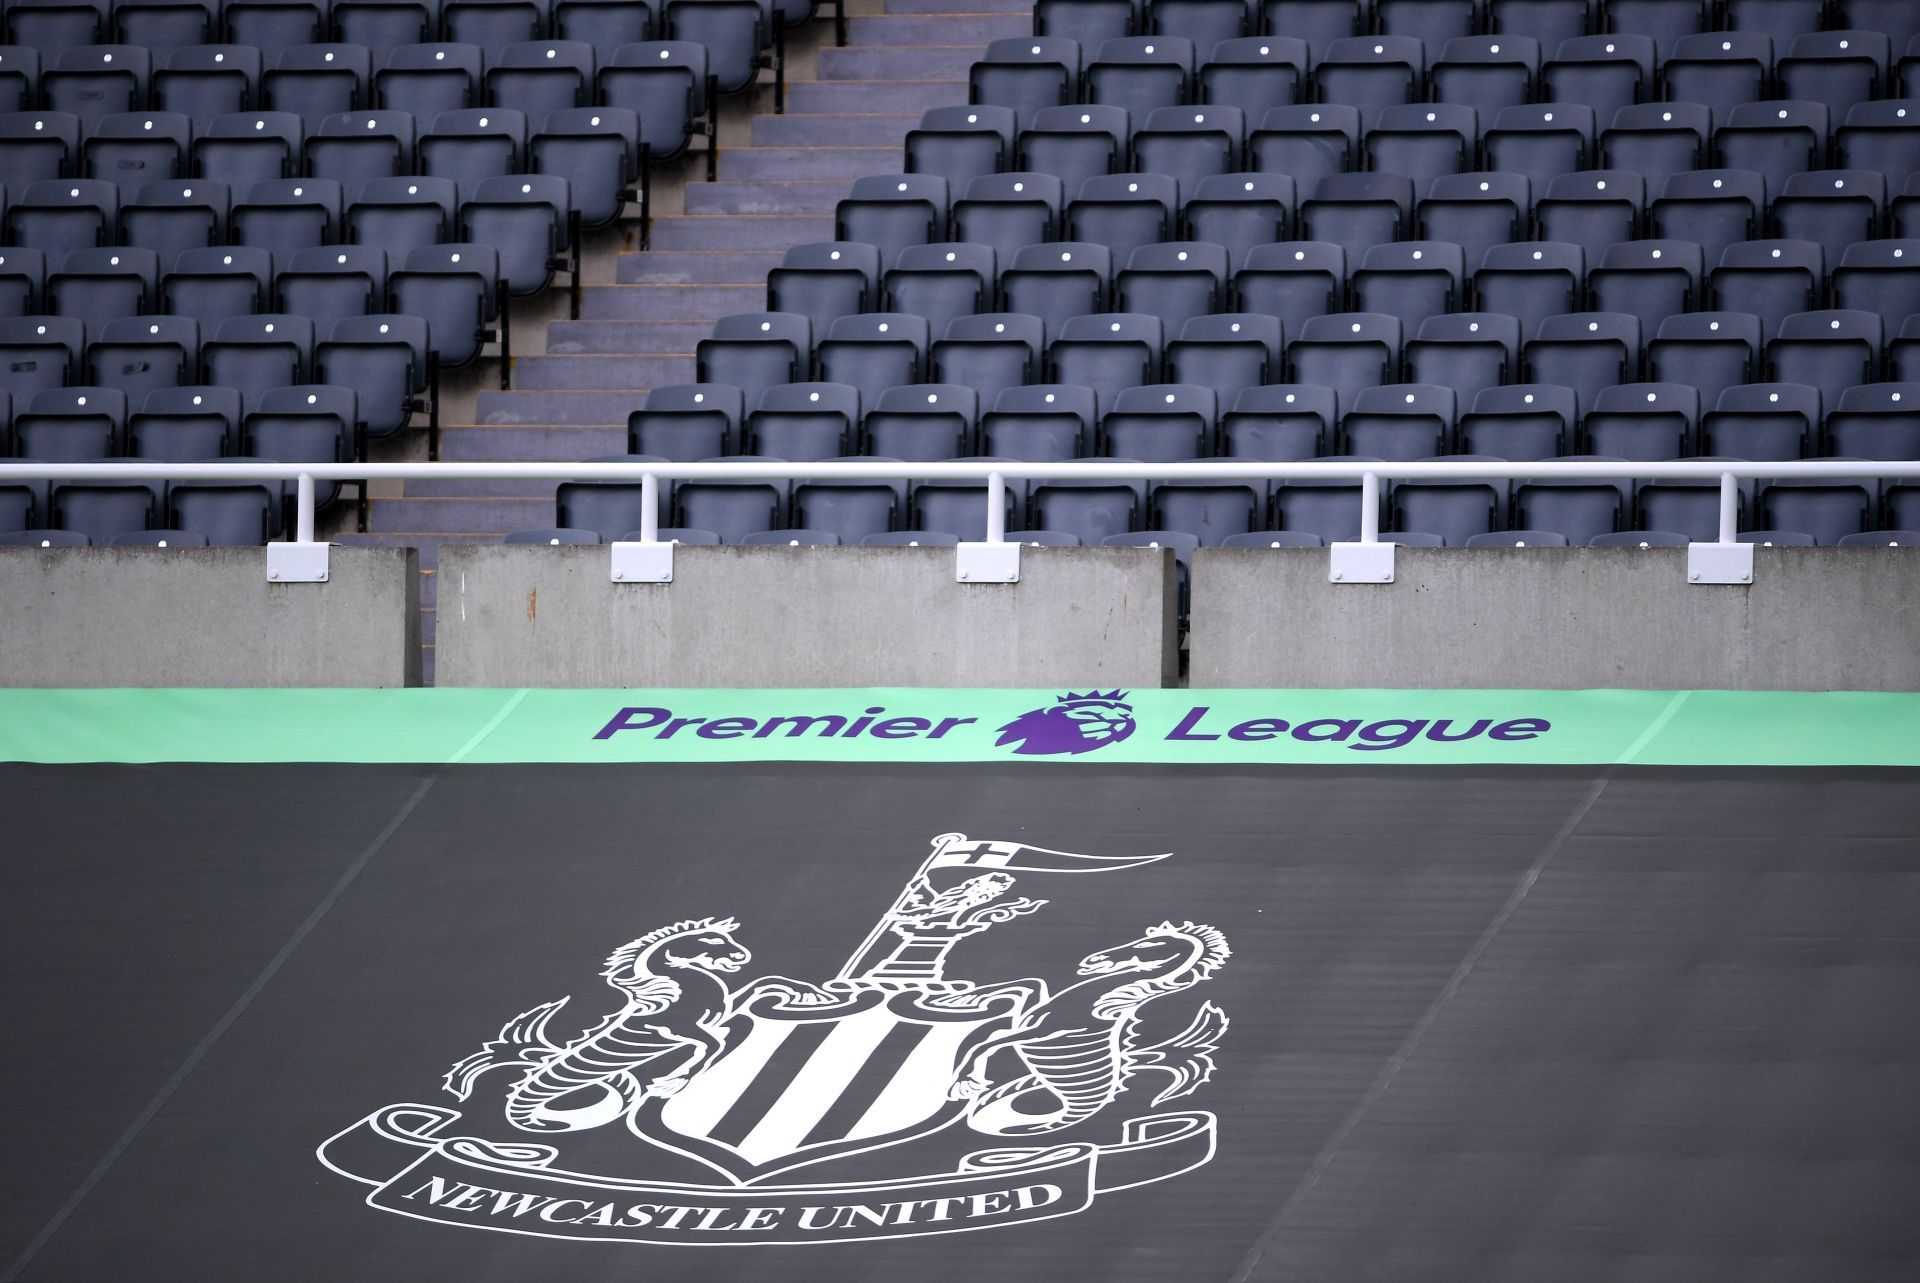 Newcastle United are the richest club in the Premier League. (Photo by Laurence Griffiths/Getty Images)